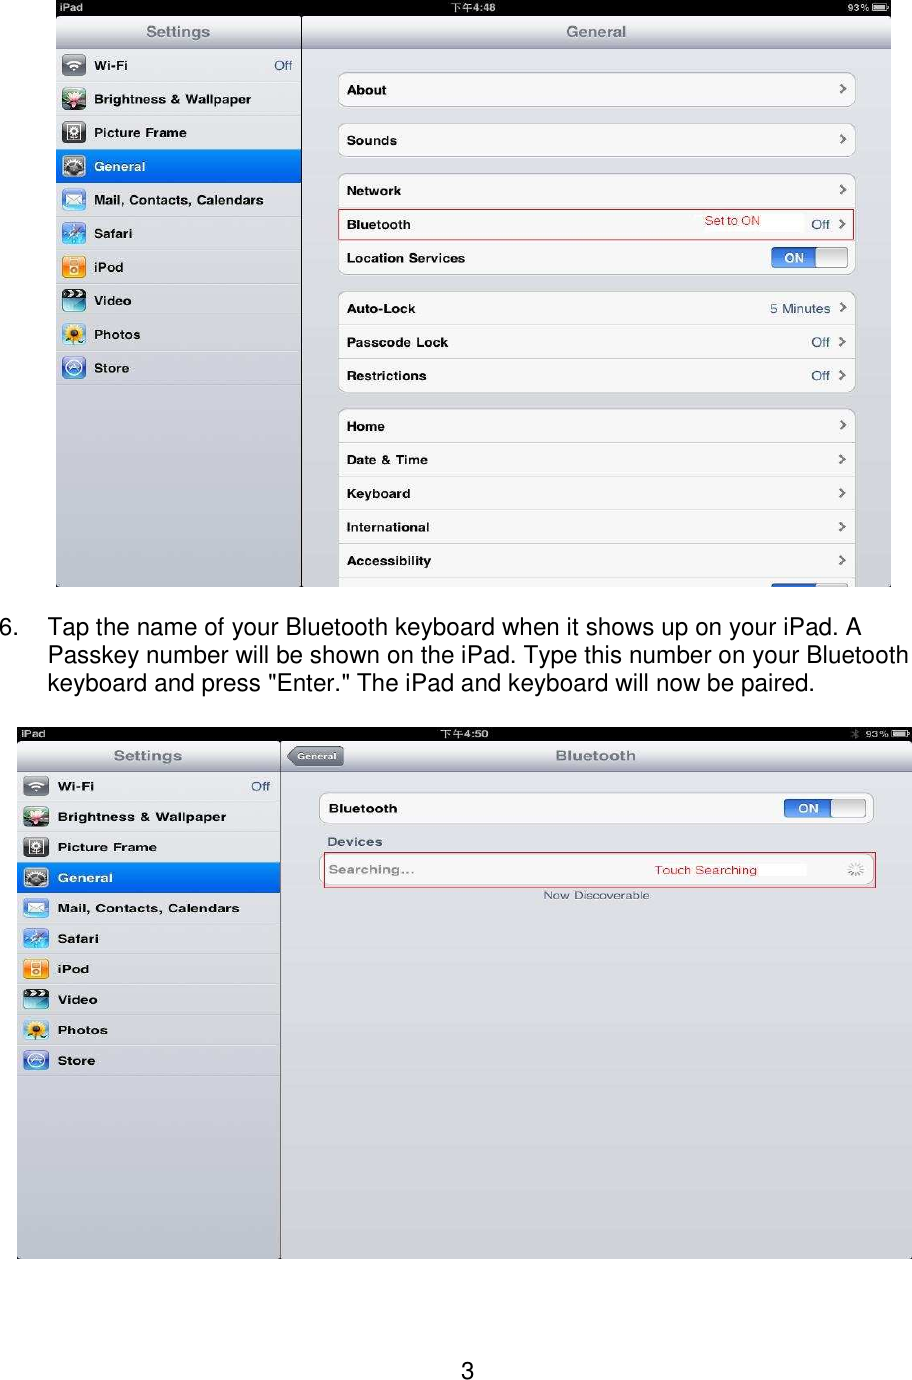  3   6.  Tap the name of your Bluetooth keyboard when it shows up on your iPad. A Passkey number will be shown on the iPad. Type this number on your Bluetooth keyboard and press &quot;Enter.&quot; The iPad and keyboard will now be paired.    